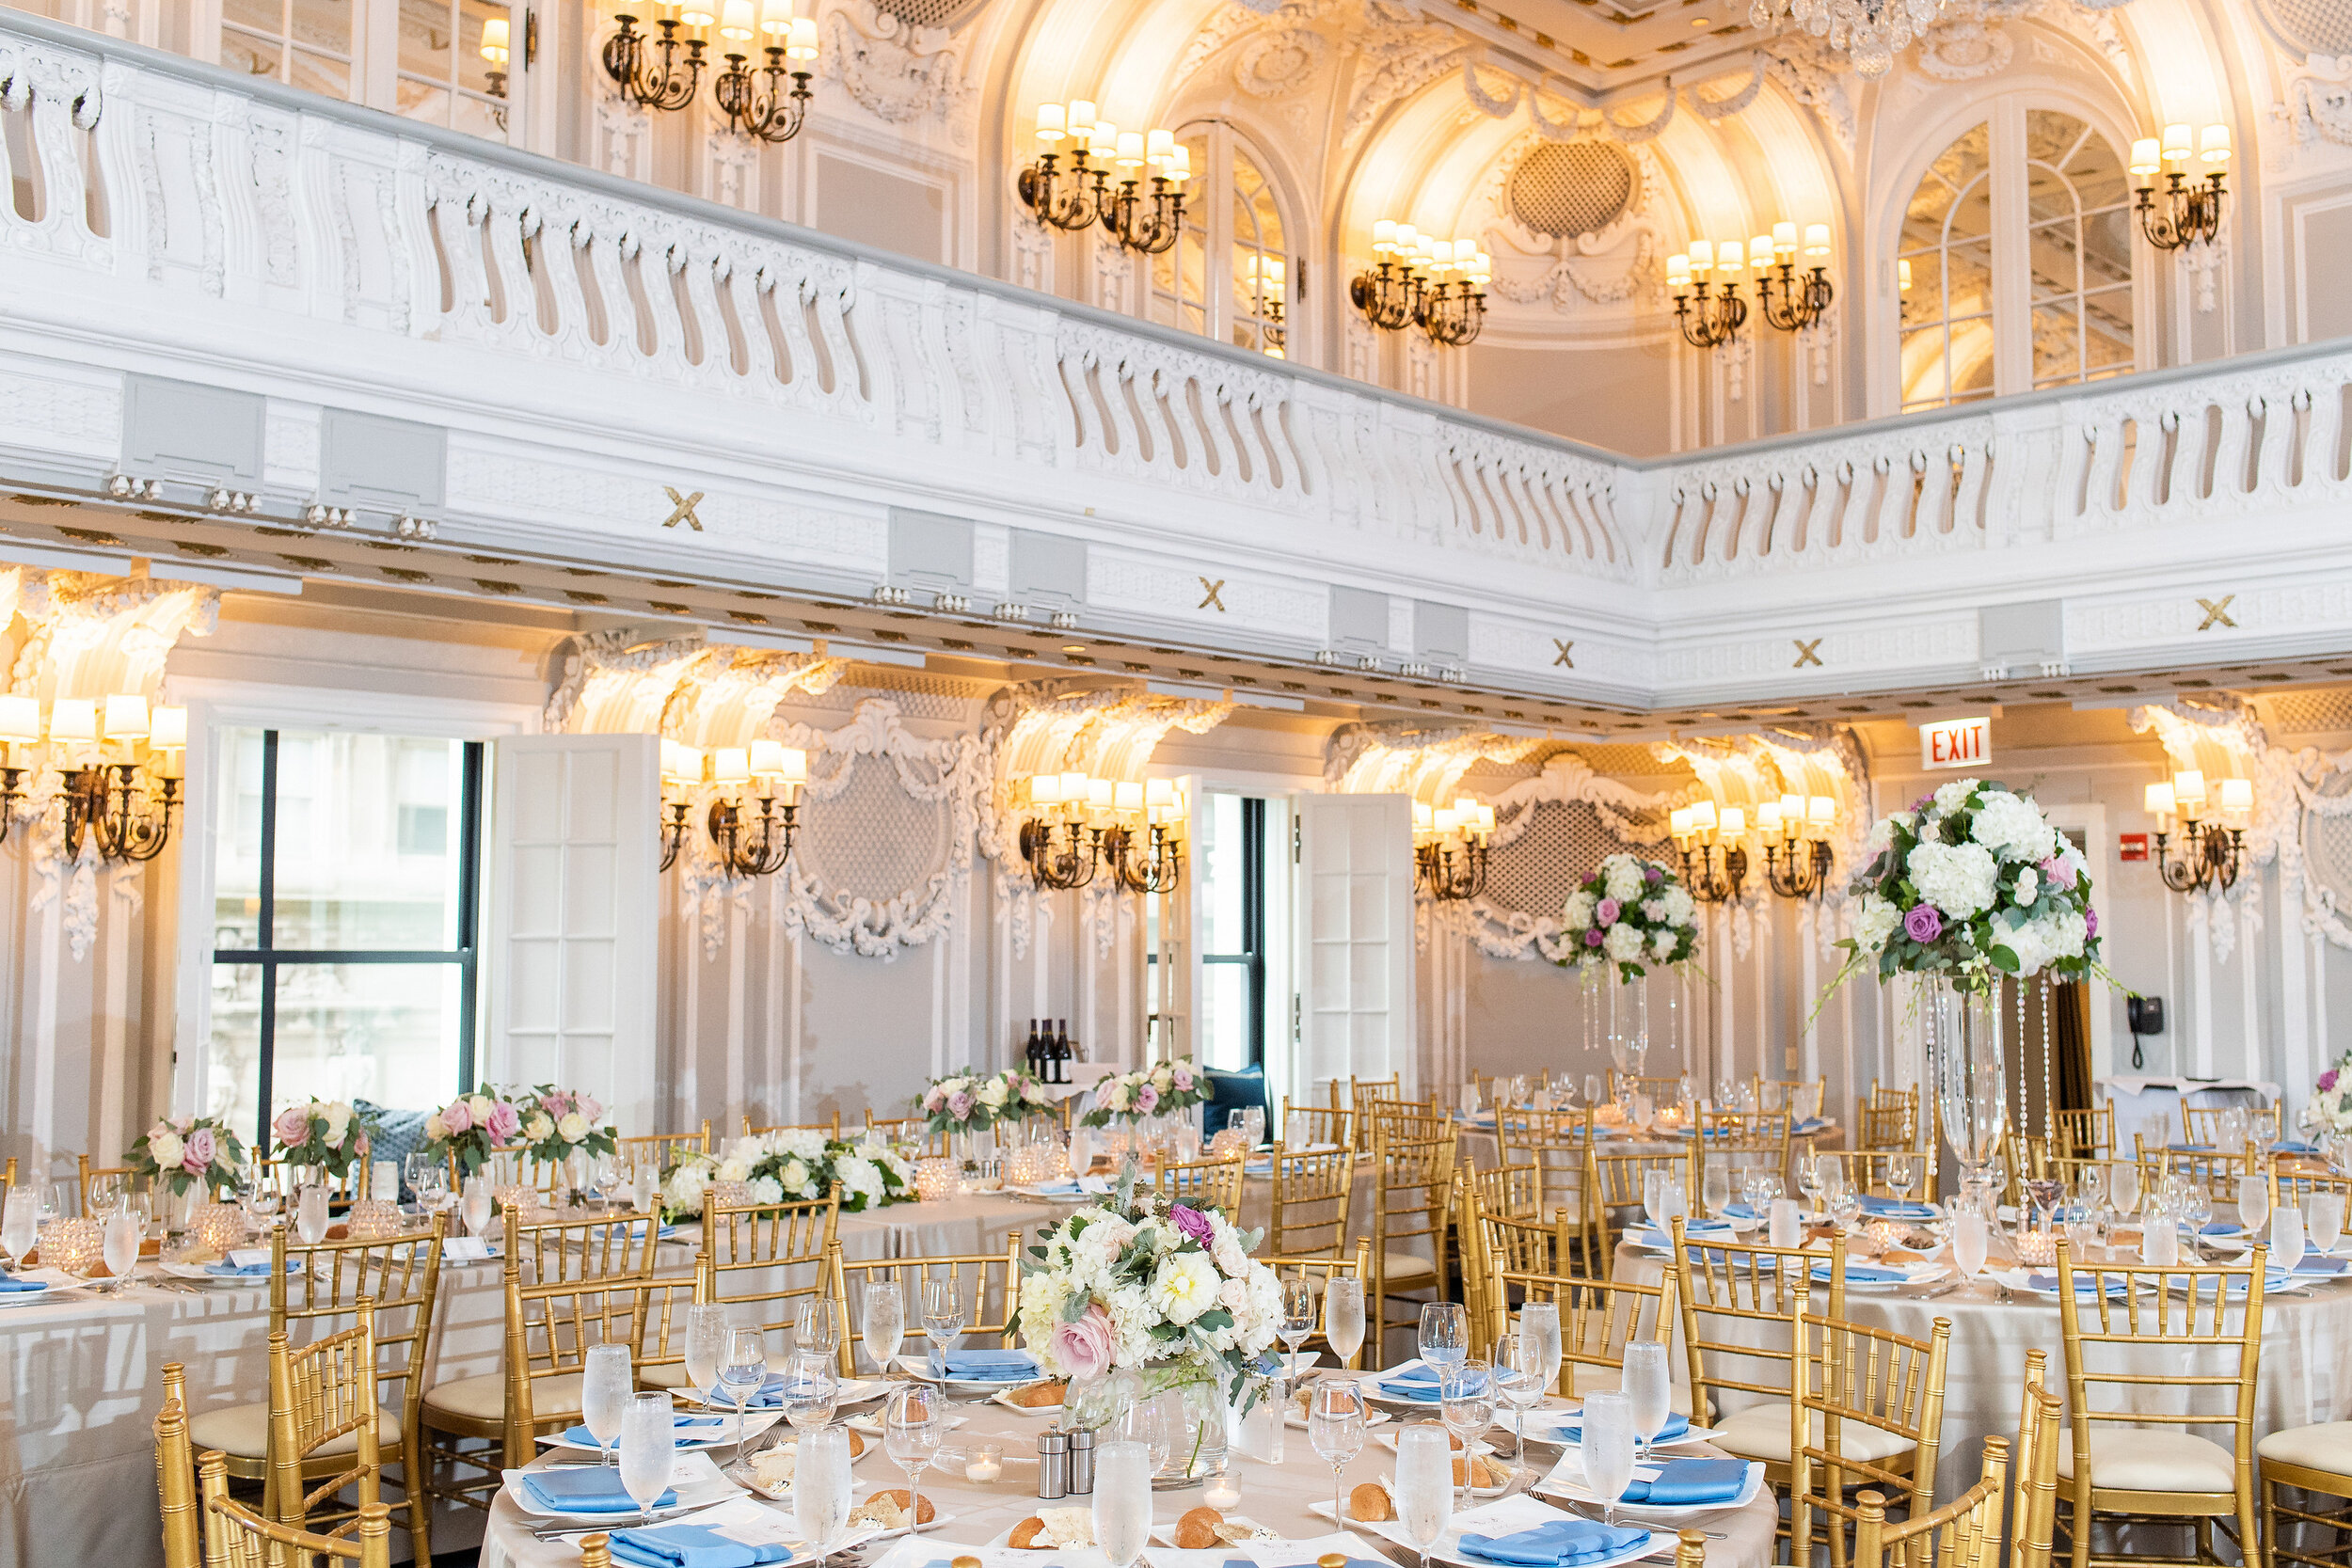 Gold and White Jewish Wedding in Downtown Chicago by Elizabeth Nord Photography featured on CHI thee WED